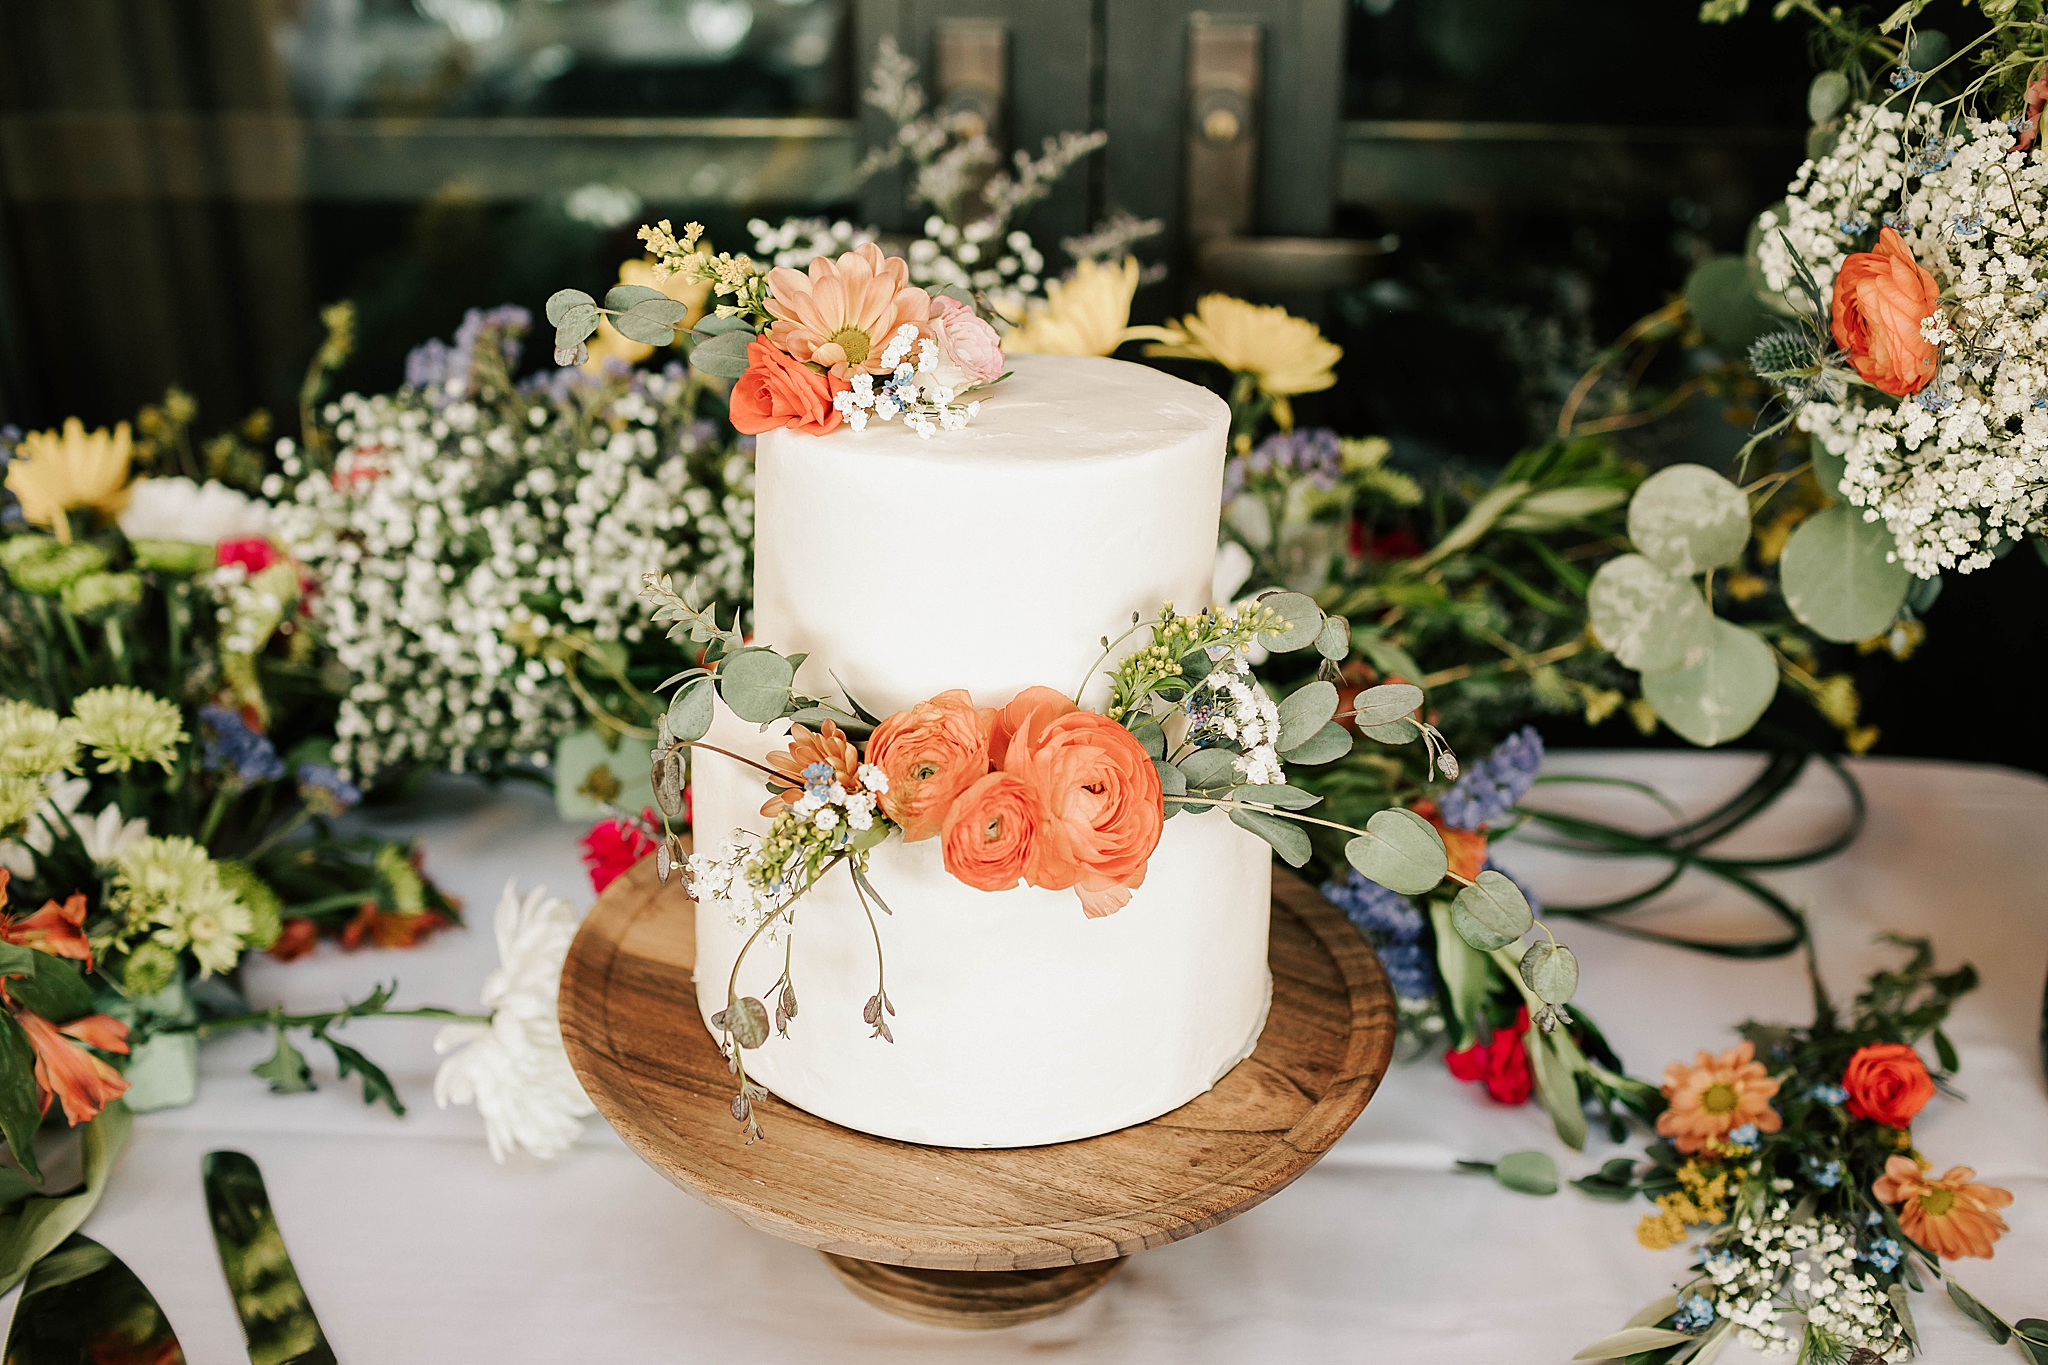 cake at snow king resort wedding venue by adrian wayment photo